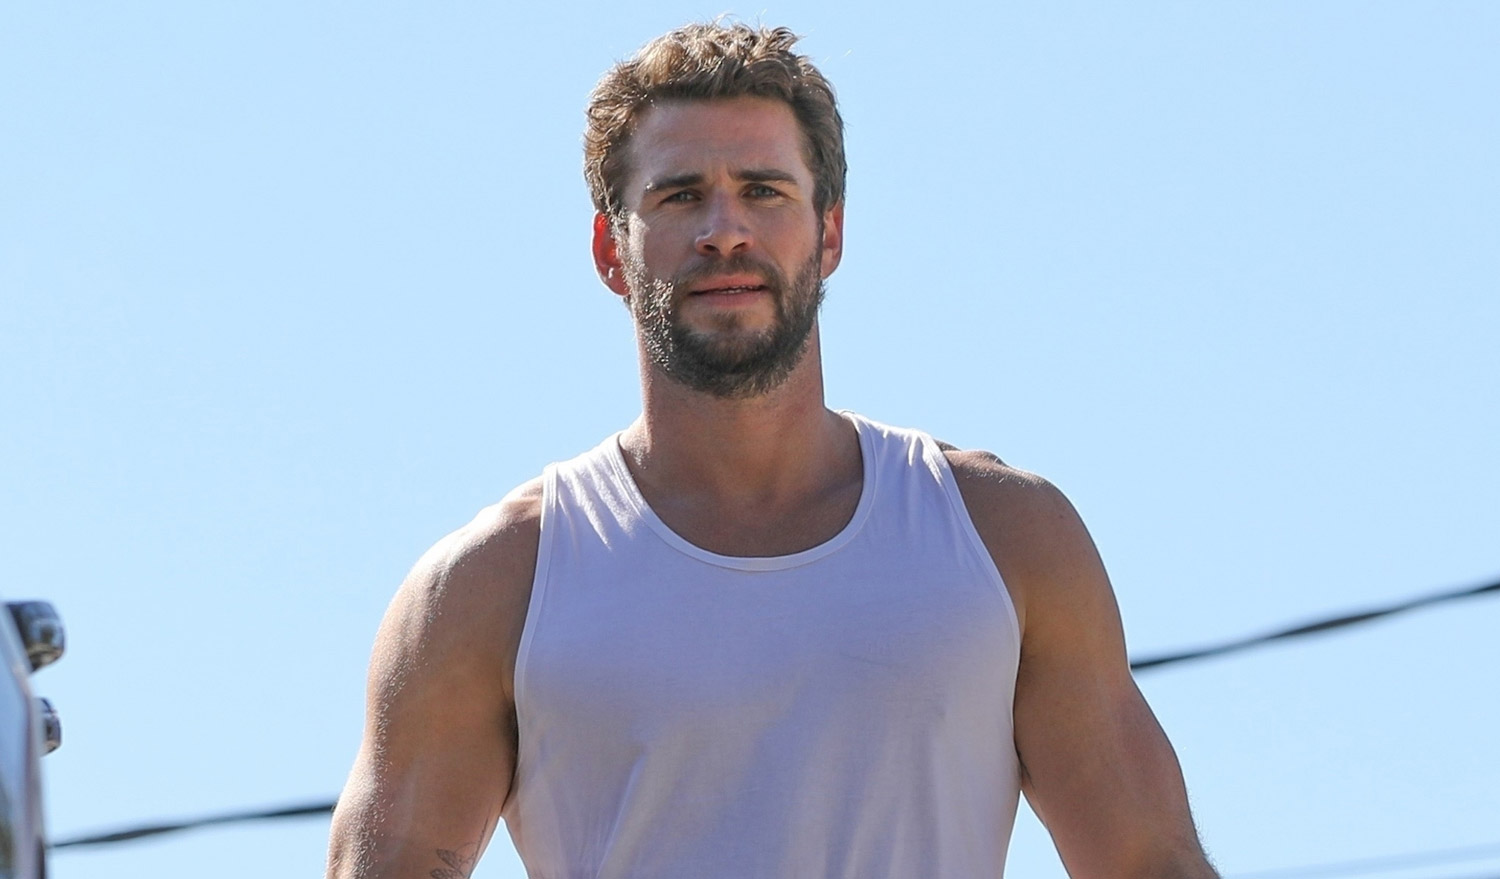 Liam Hemsworth’s Muscles Look So Pumped Up After His Friday Morning Workout...